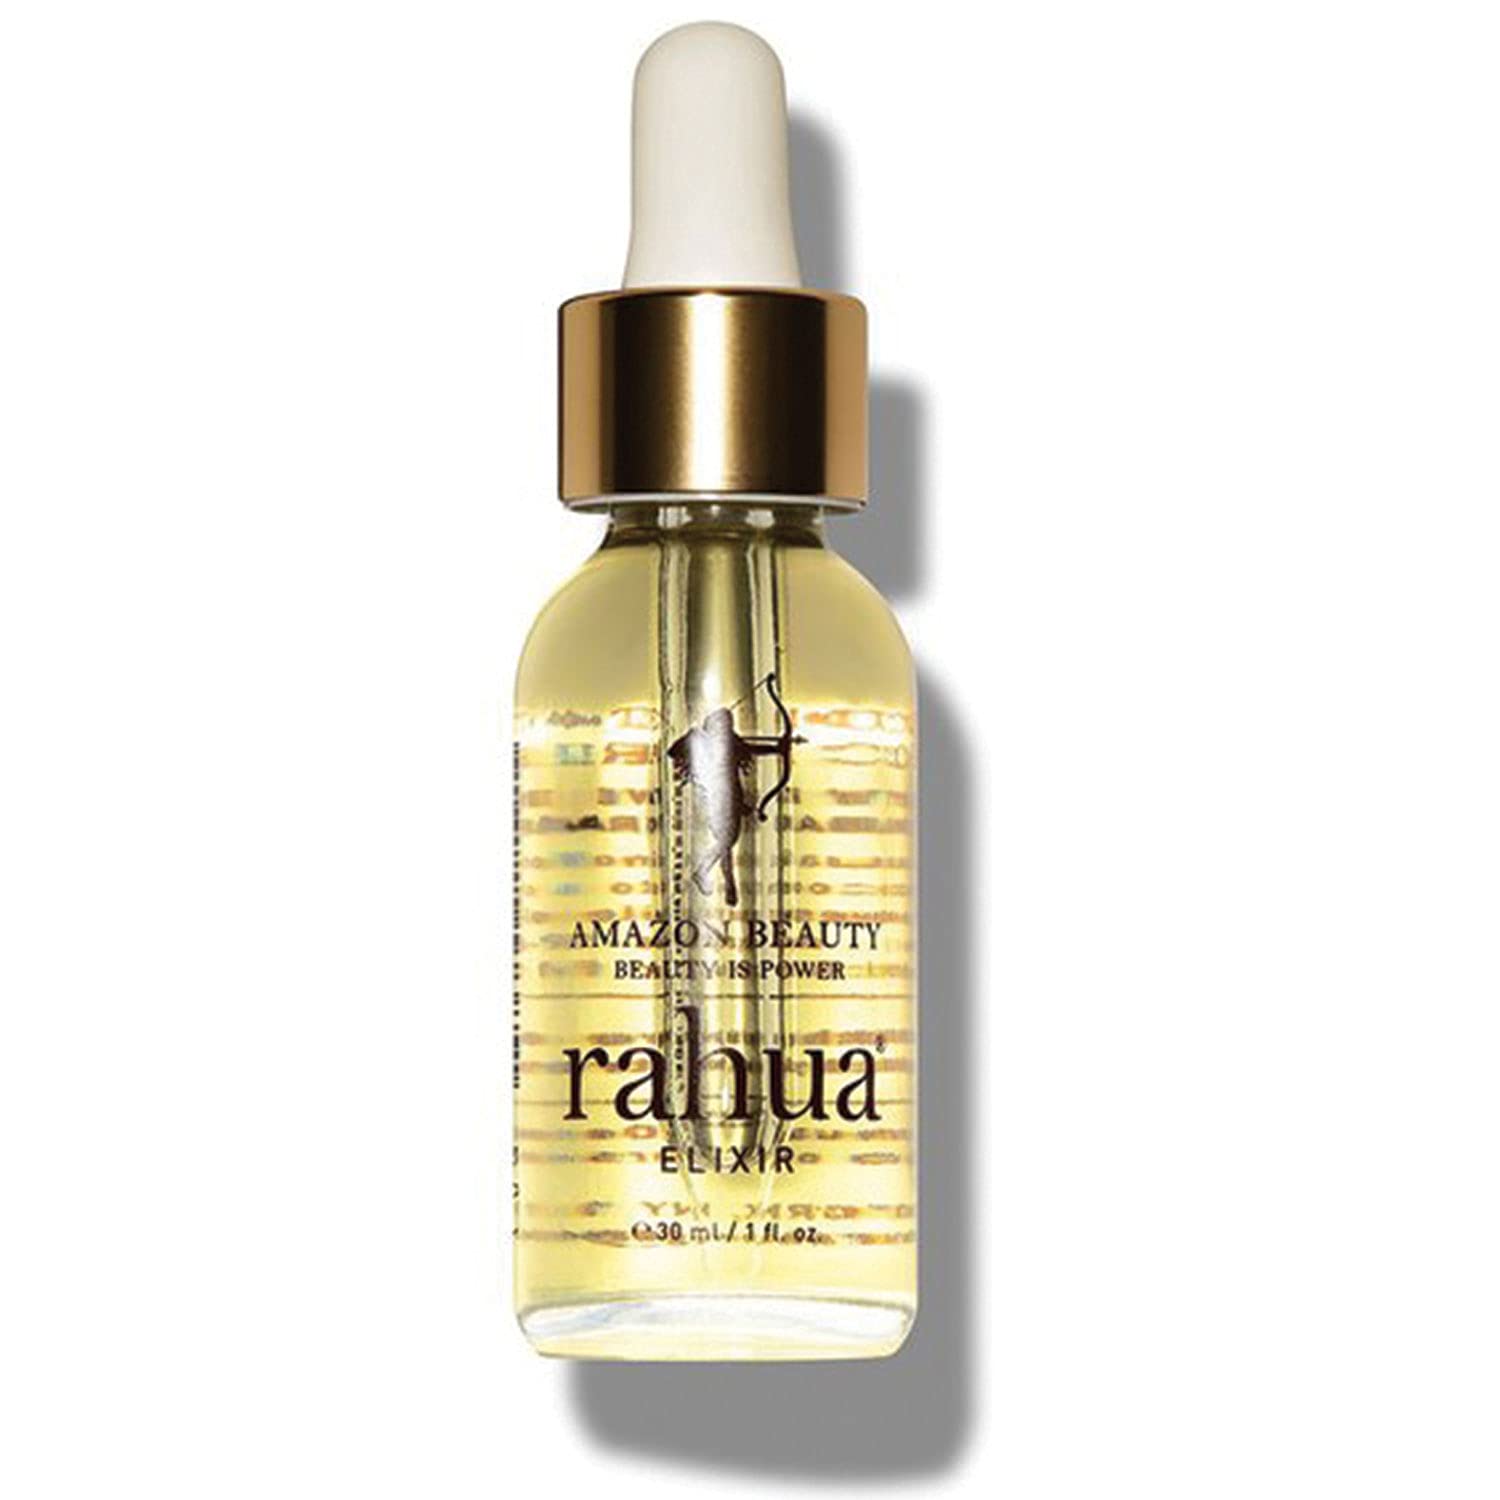 Rahua Elixir 1 Fl Oz, Pure Rahua Hair Oil for Healthy Naturally Radiant Hair, Elixir Oil Repairs, Strengthens and Restores Dry and Damaged hair, Hair and Scalp Treatment, Best for All Hair Types